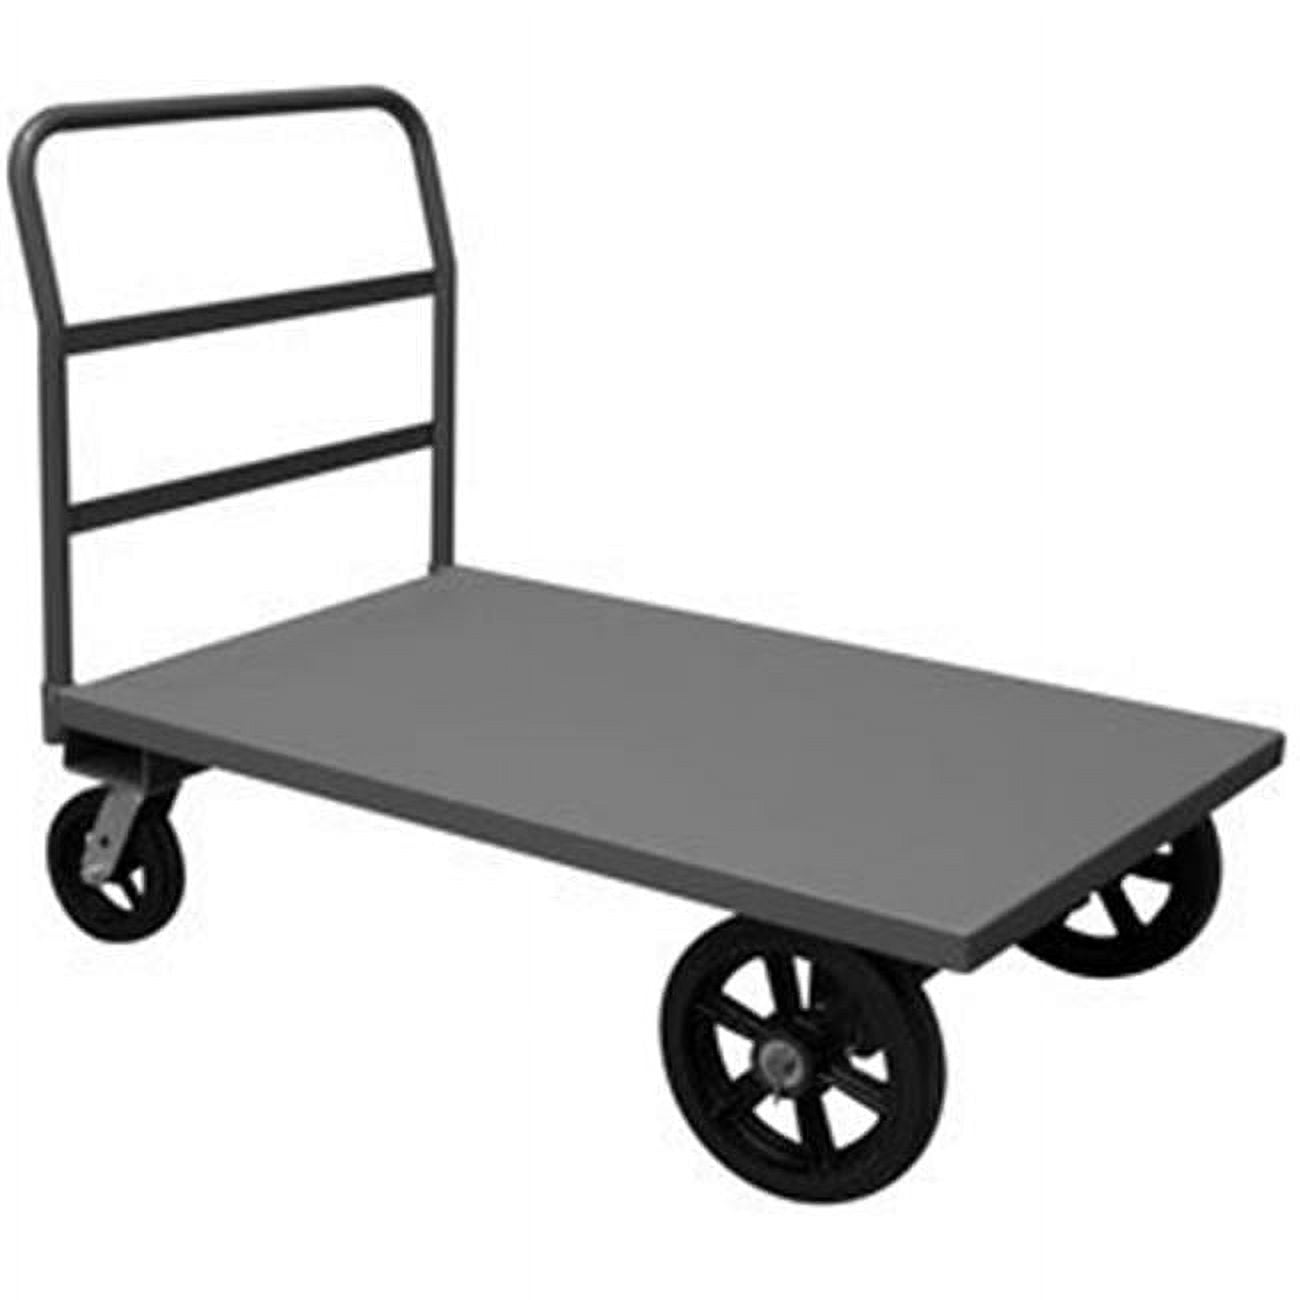 Picture of Durham PT30488-12MR95 14 in. Platform Trucks with Mold-On Rubber Casters, Gray - 3000 lbs